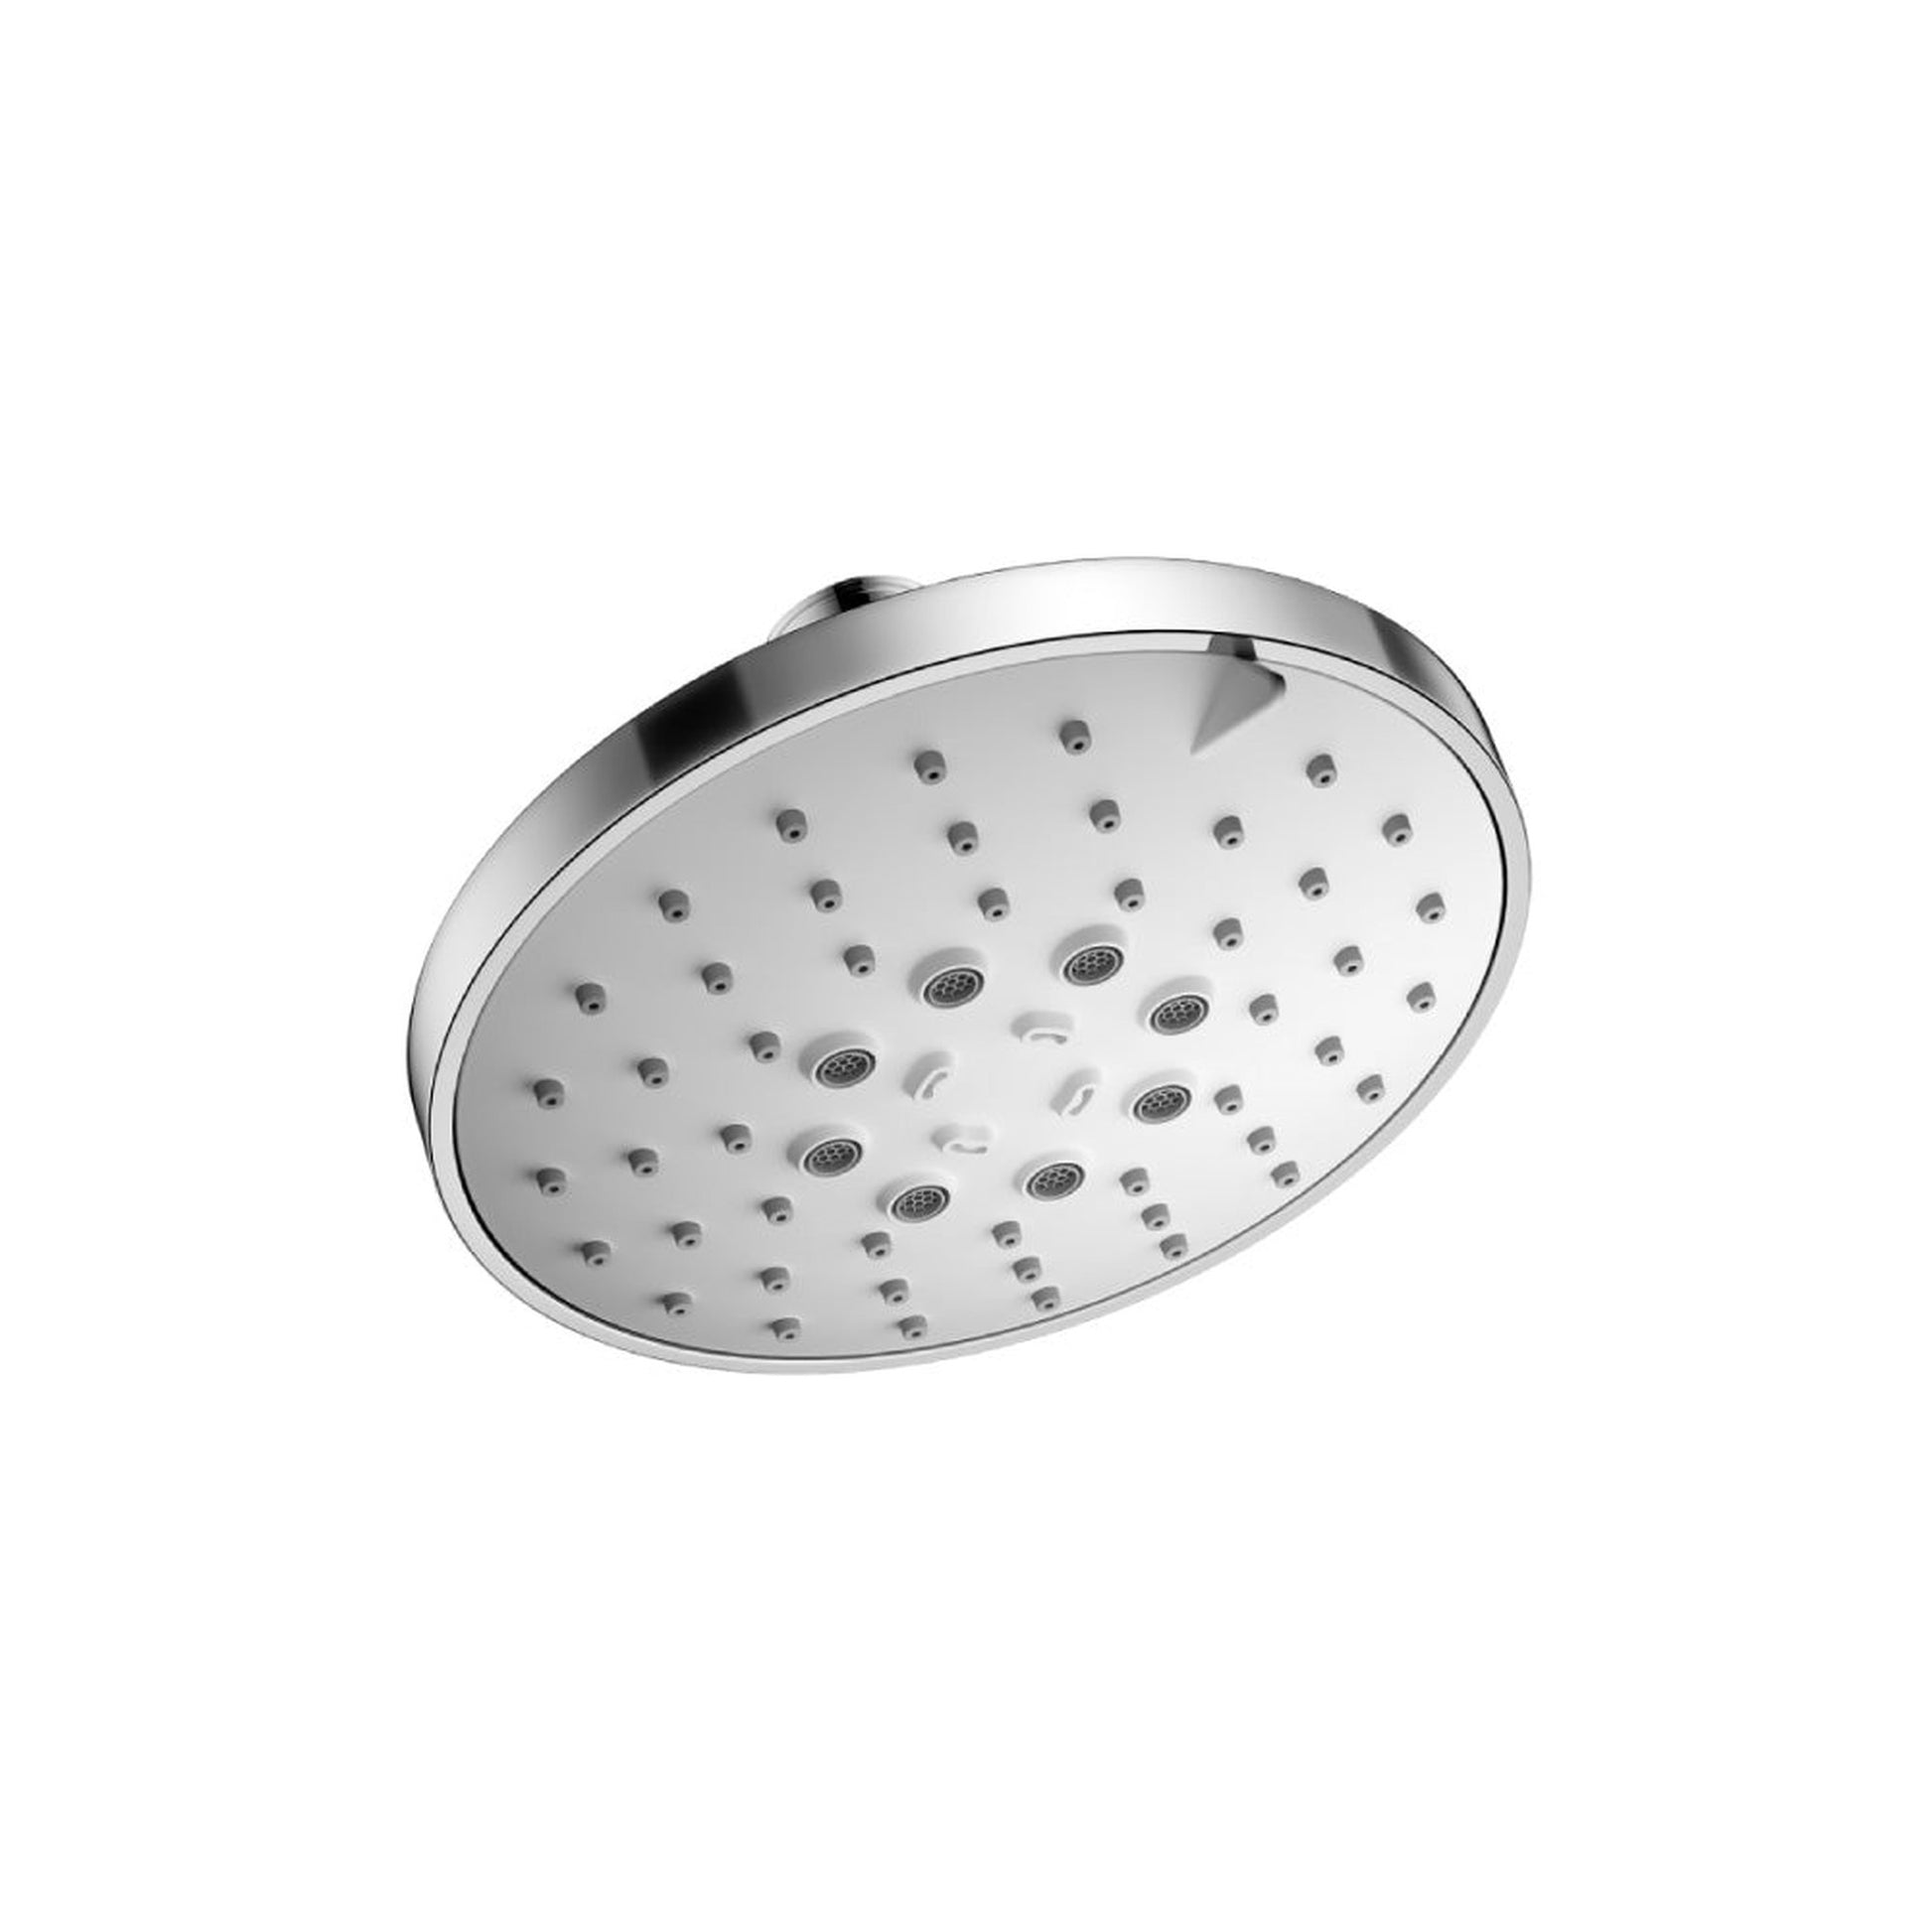 Isenberg Universal Fixtures Polished Nickel PVD 3-Function ABS Showerhead